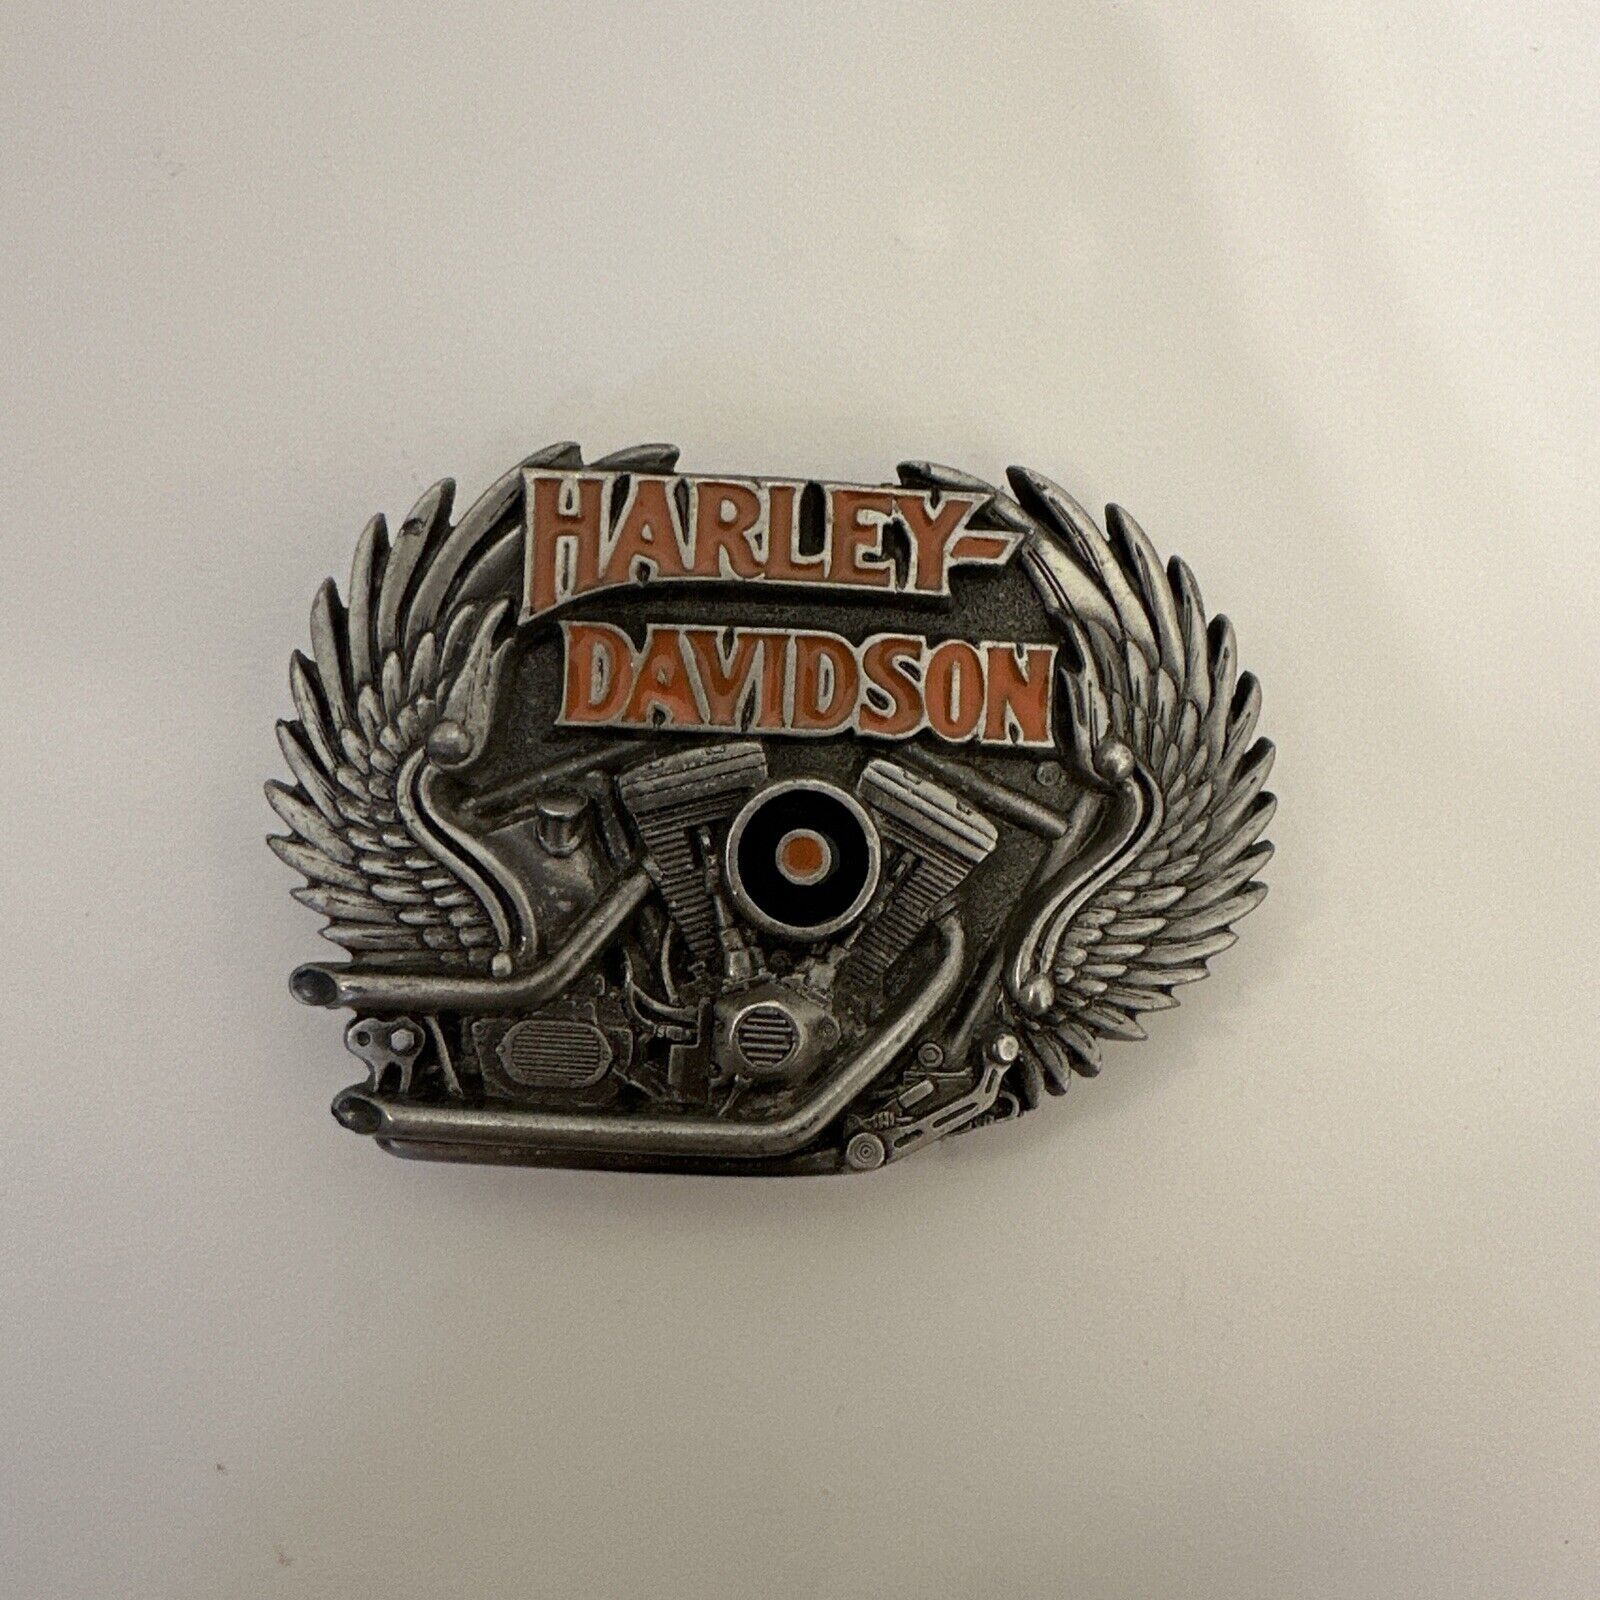 Harley Davidson 1991 H410 Baron USA Made Belt Buckle Official Licenced Product